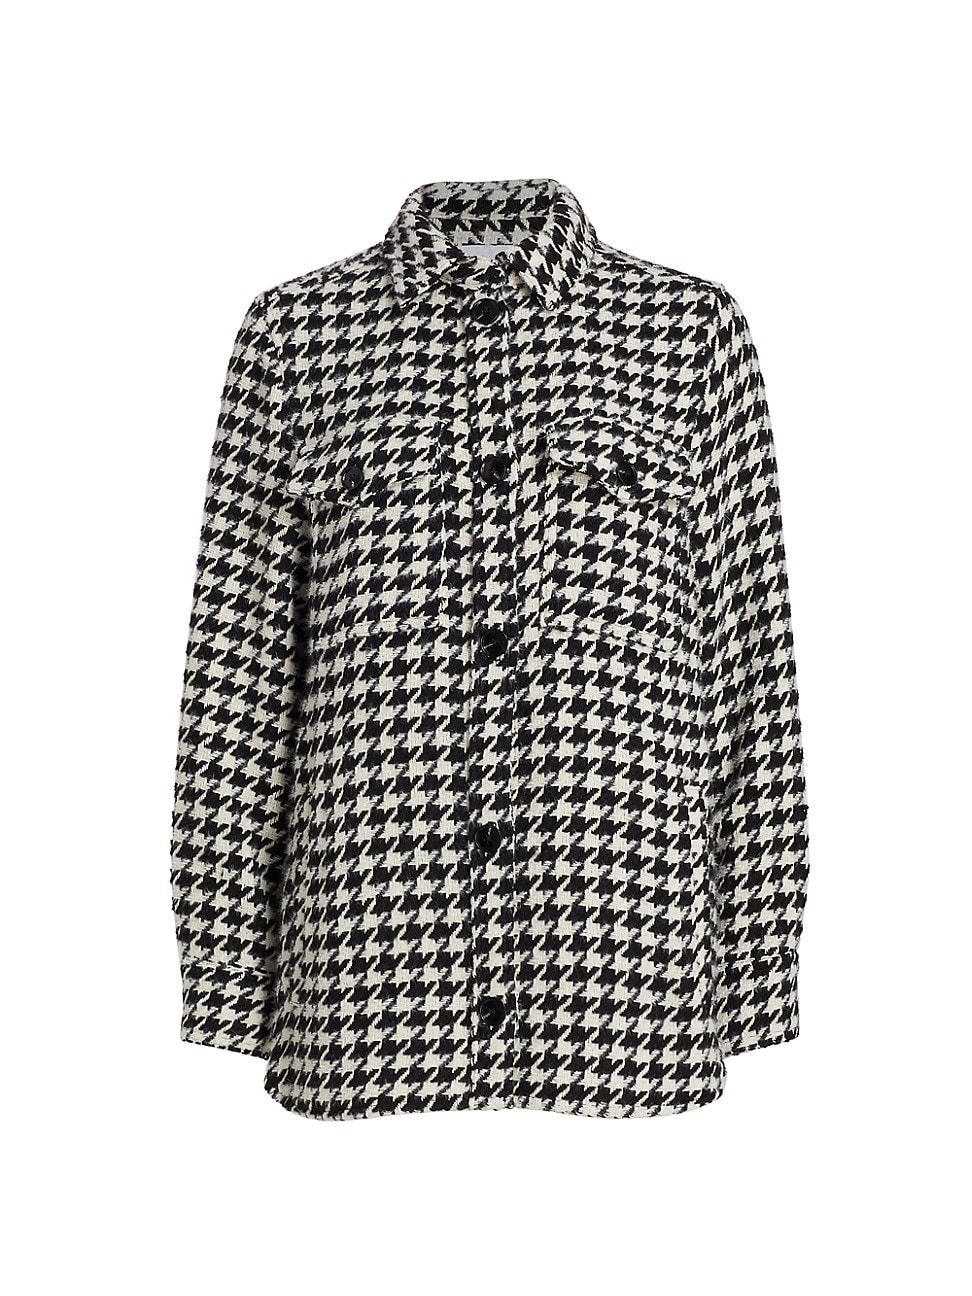 Women's Libby Houndstooth Shacket - Houndstooth - Size XL | Saks Fifth Avenue